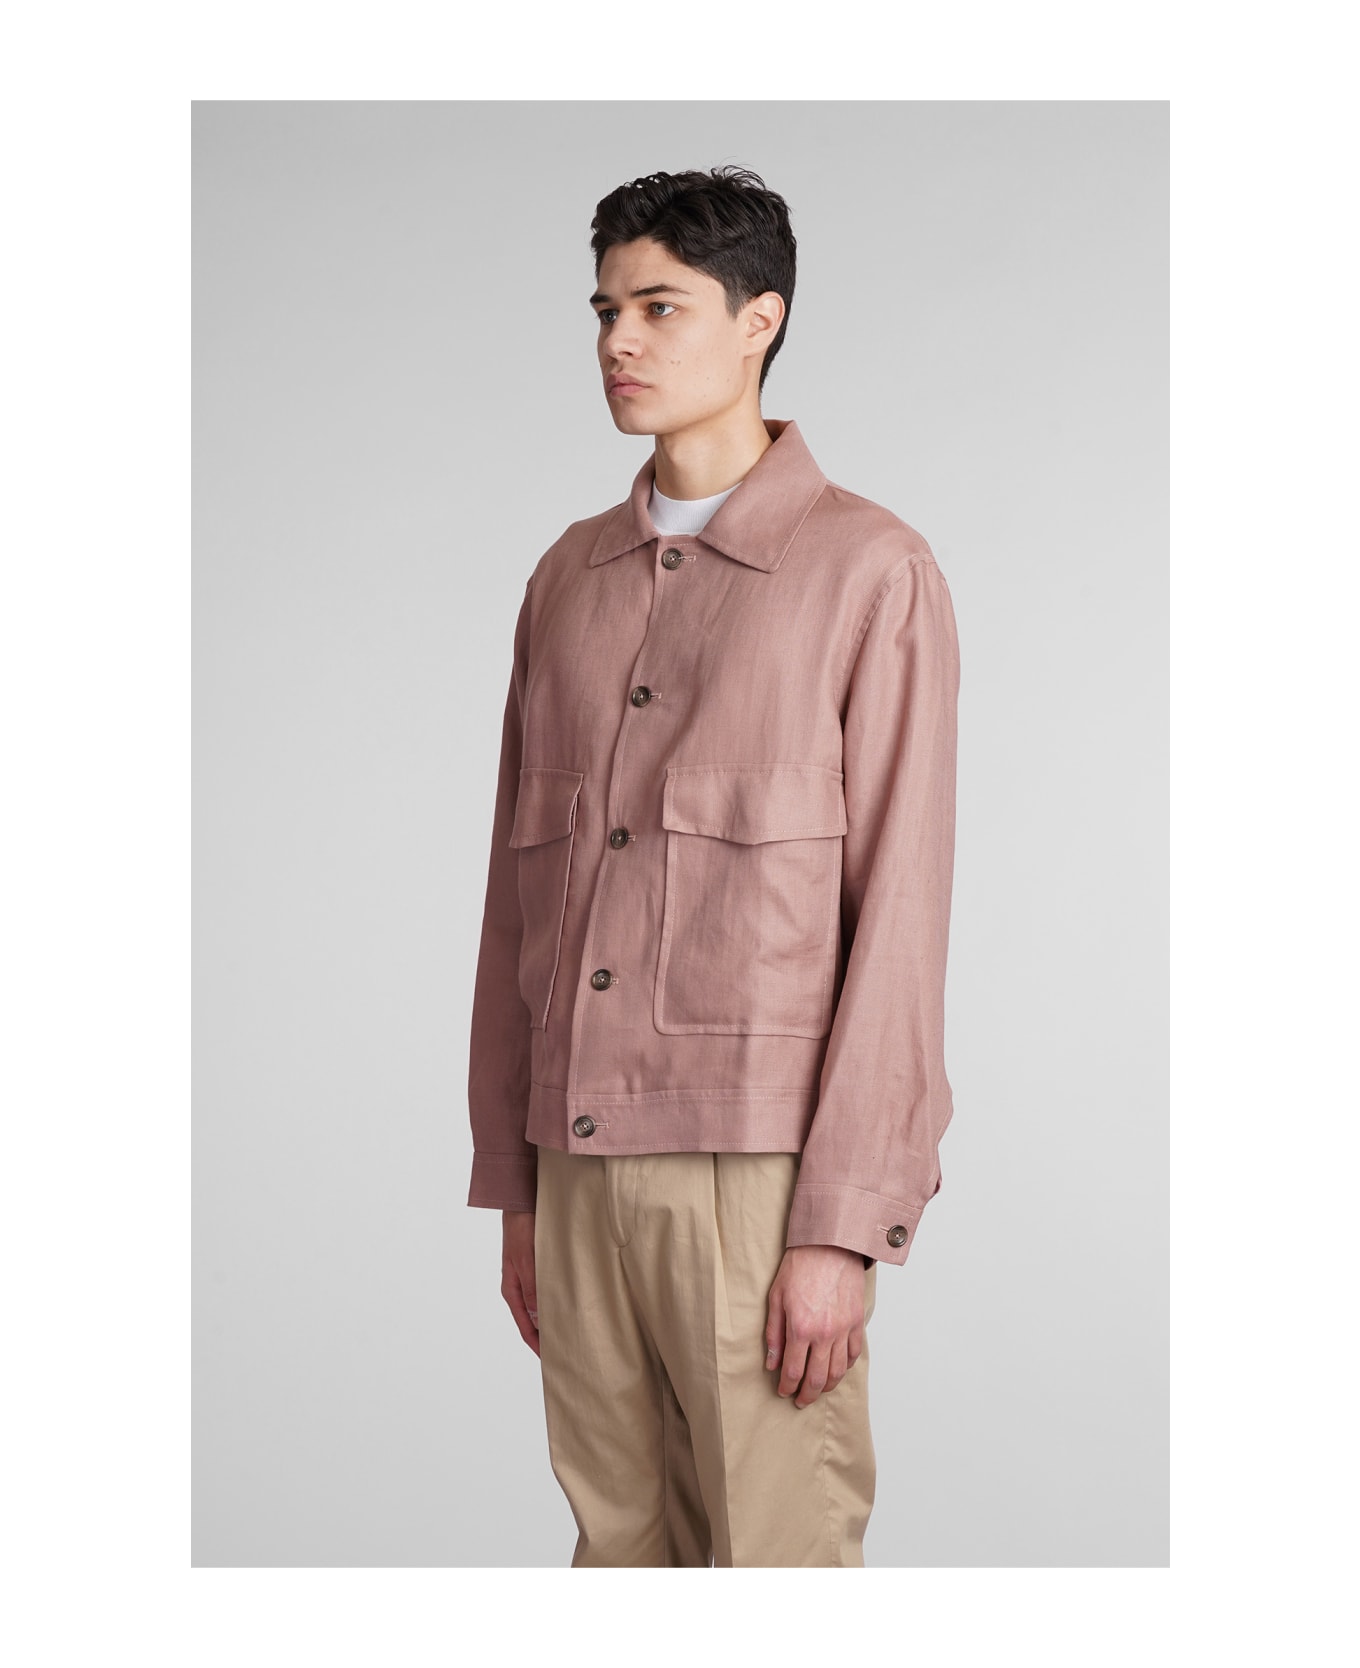 Tagliatore 0205 Amir Casual Jacket In Rose-pink Linen - rose-pink